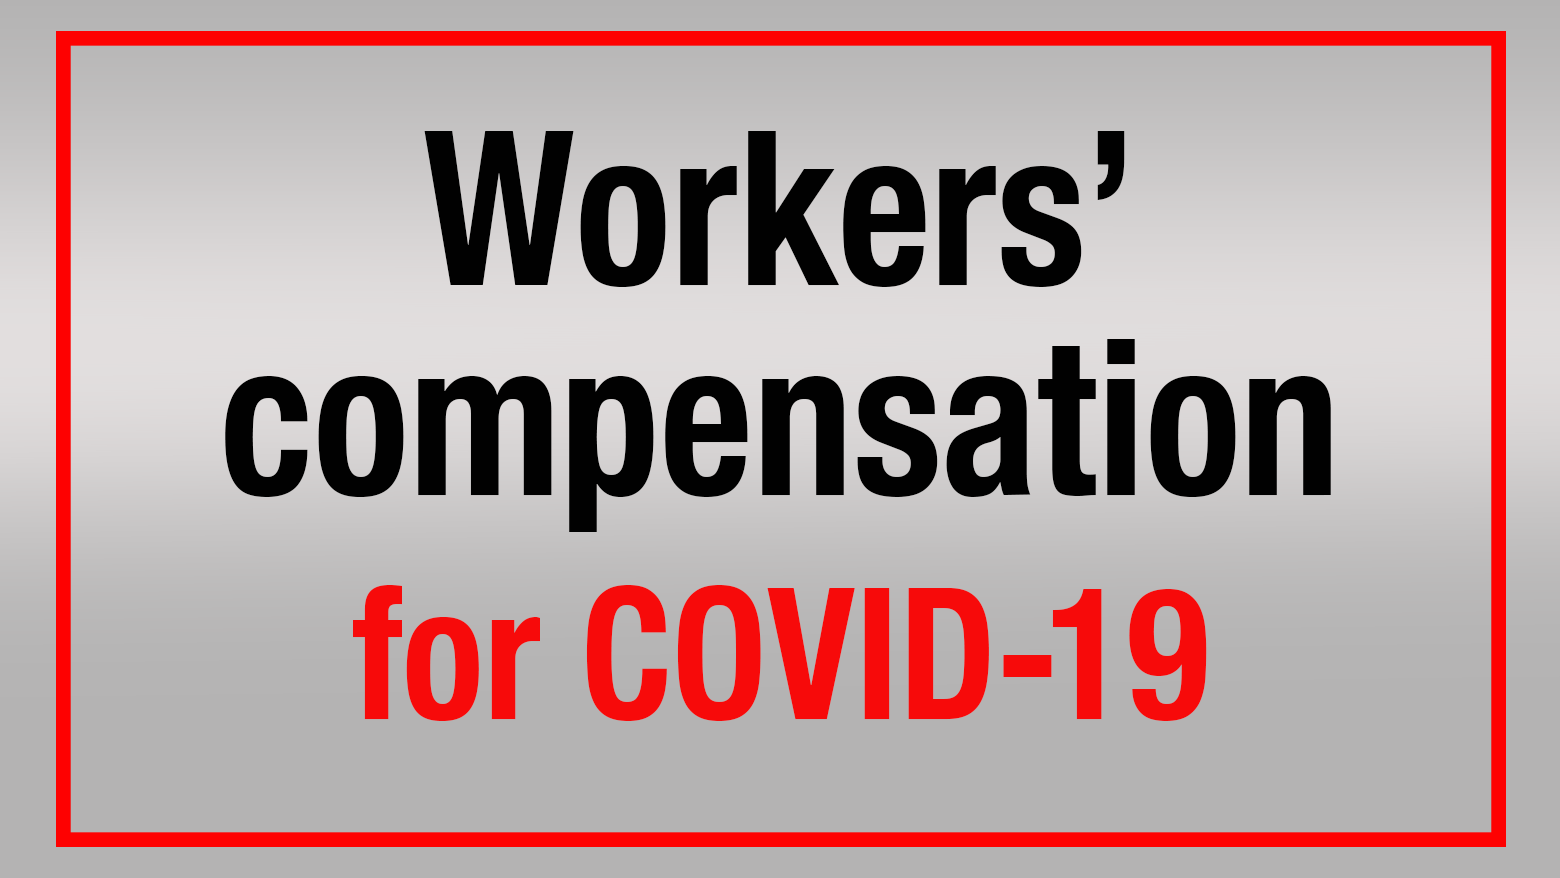 Japan offers compensation for people who get infected with COVID-19 at work